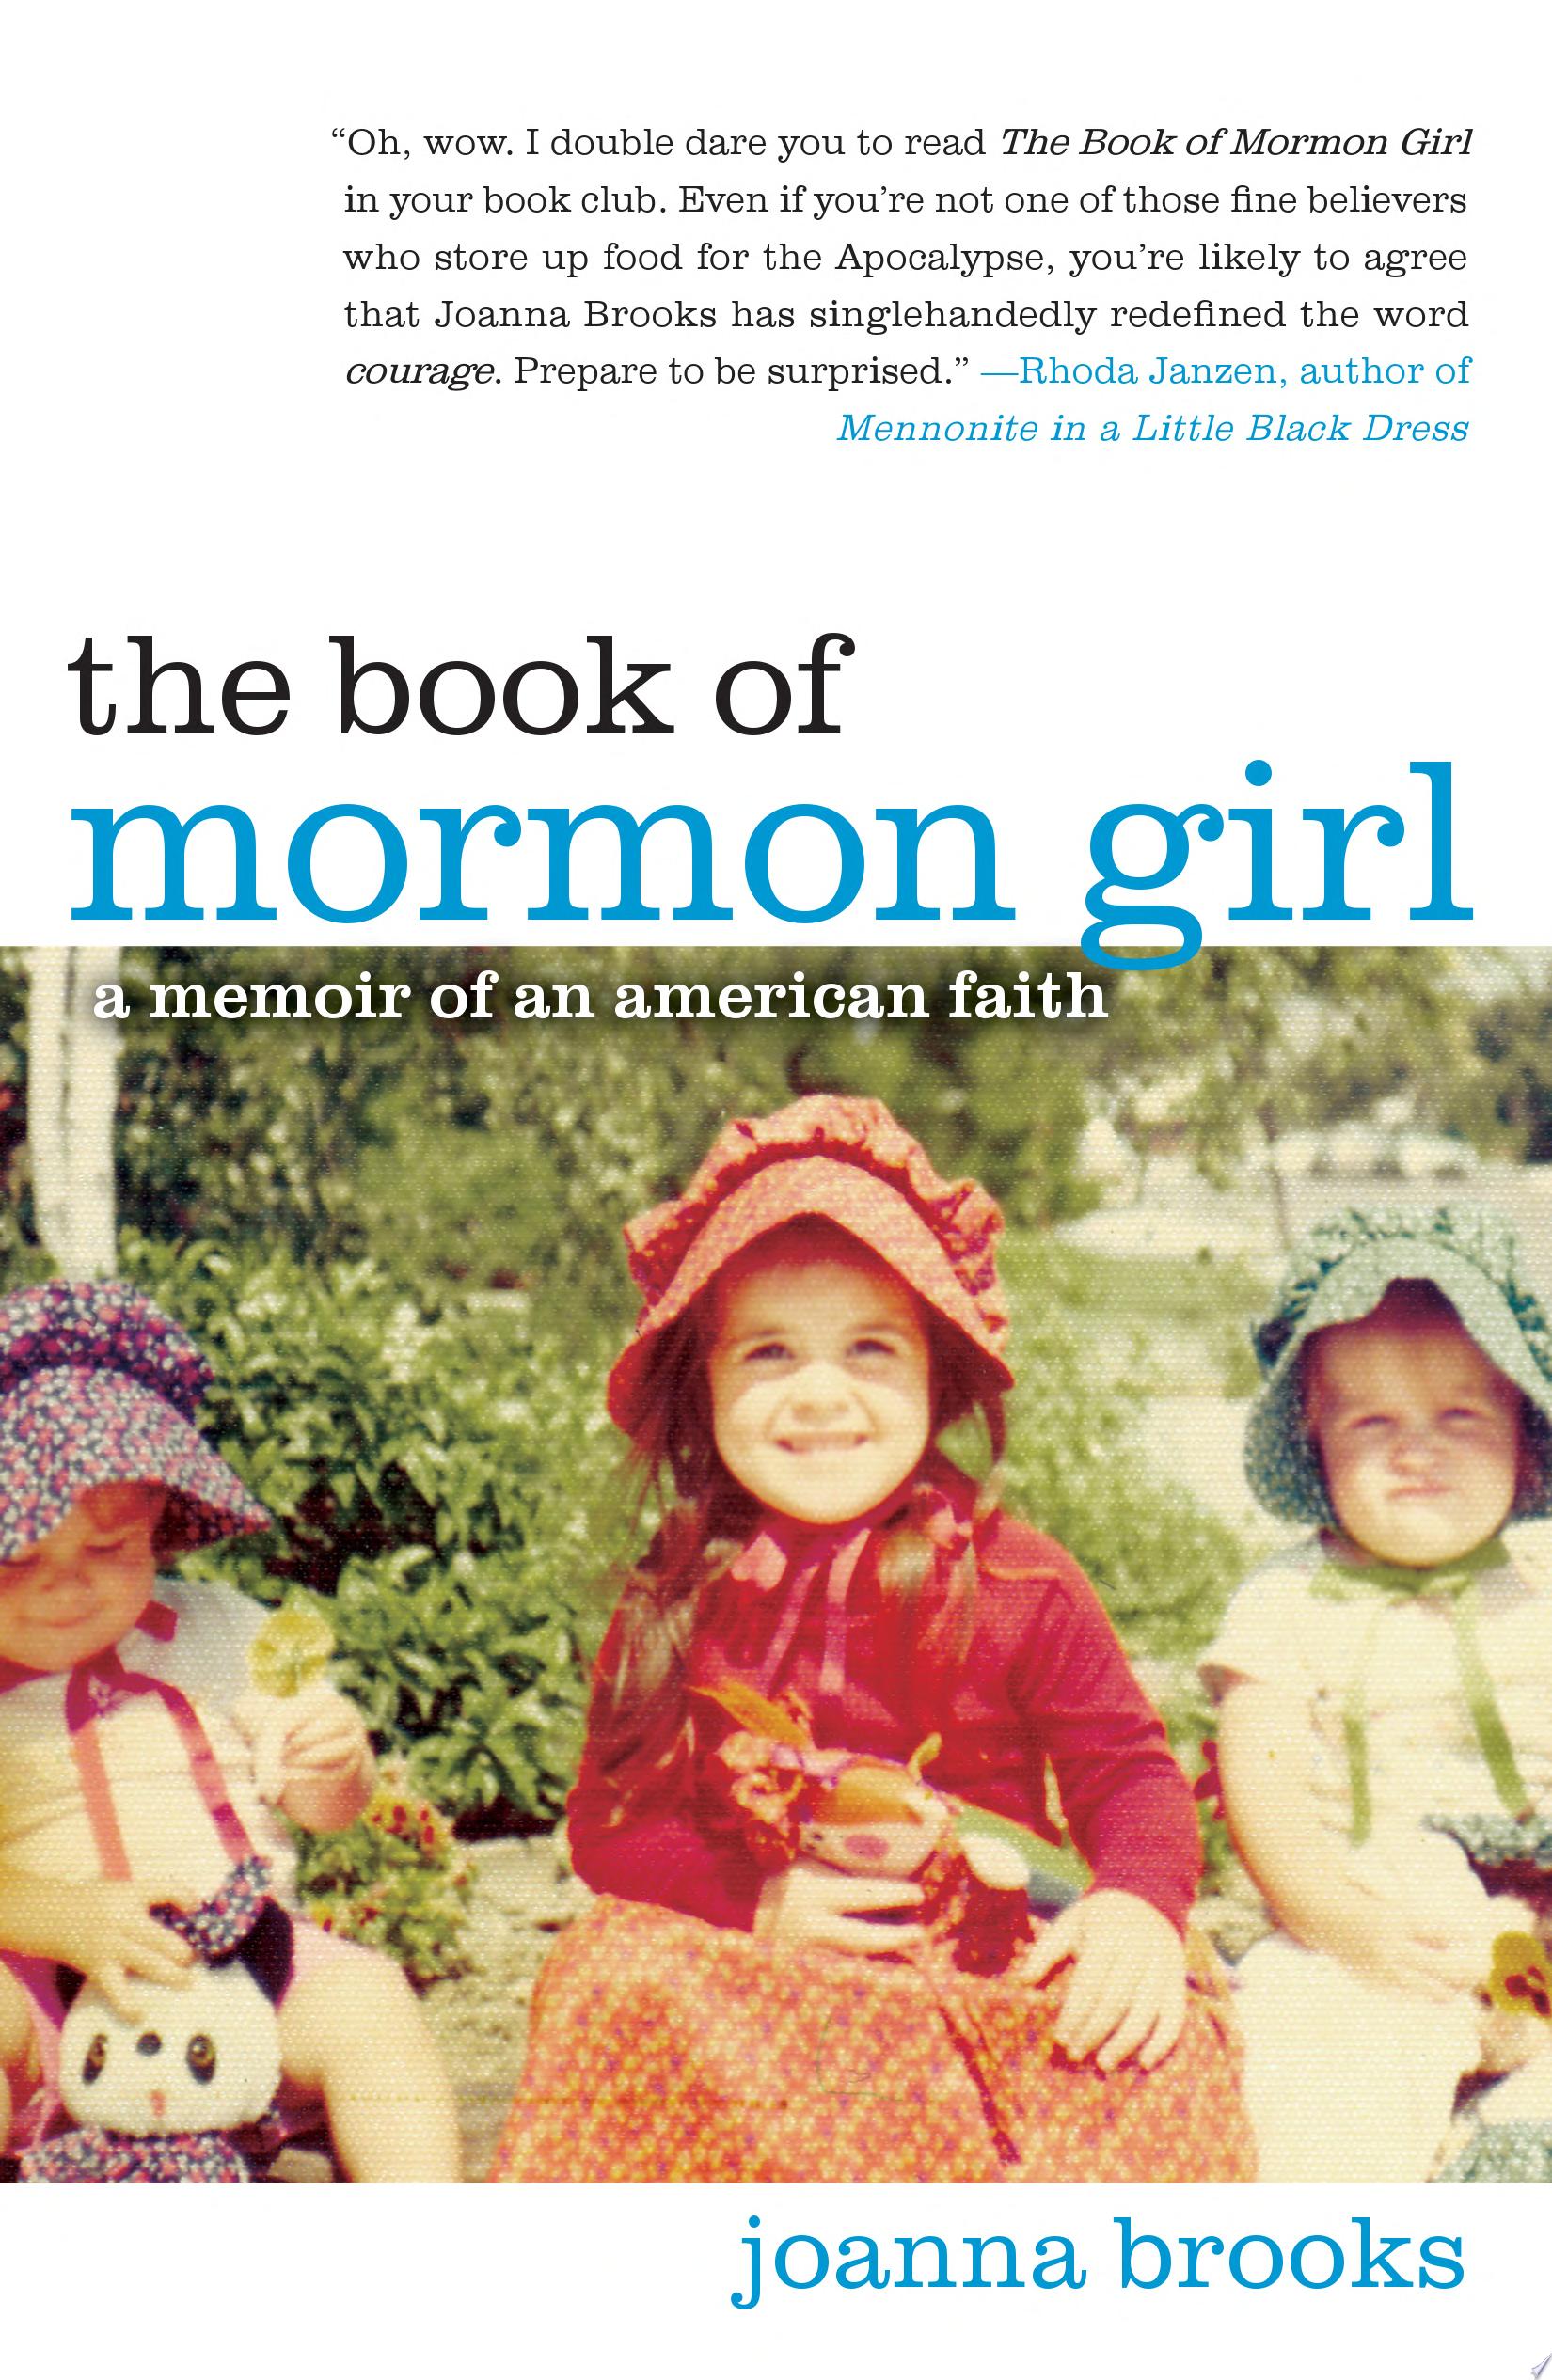 Image for "The Book of Mormon Girl"